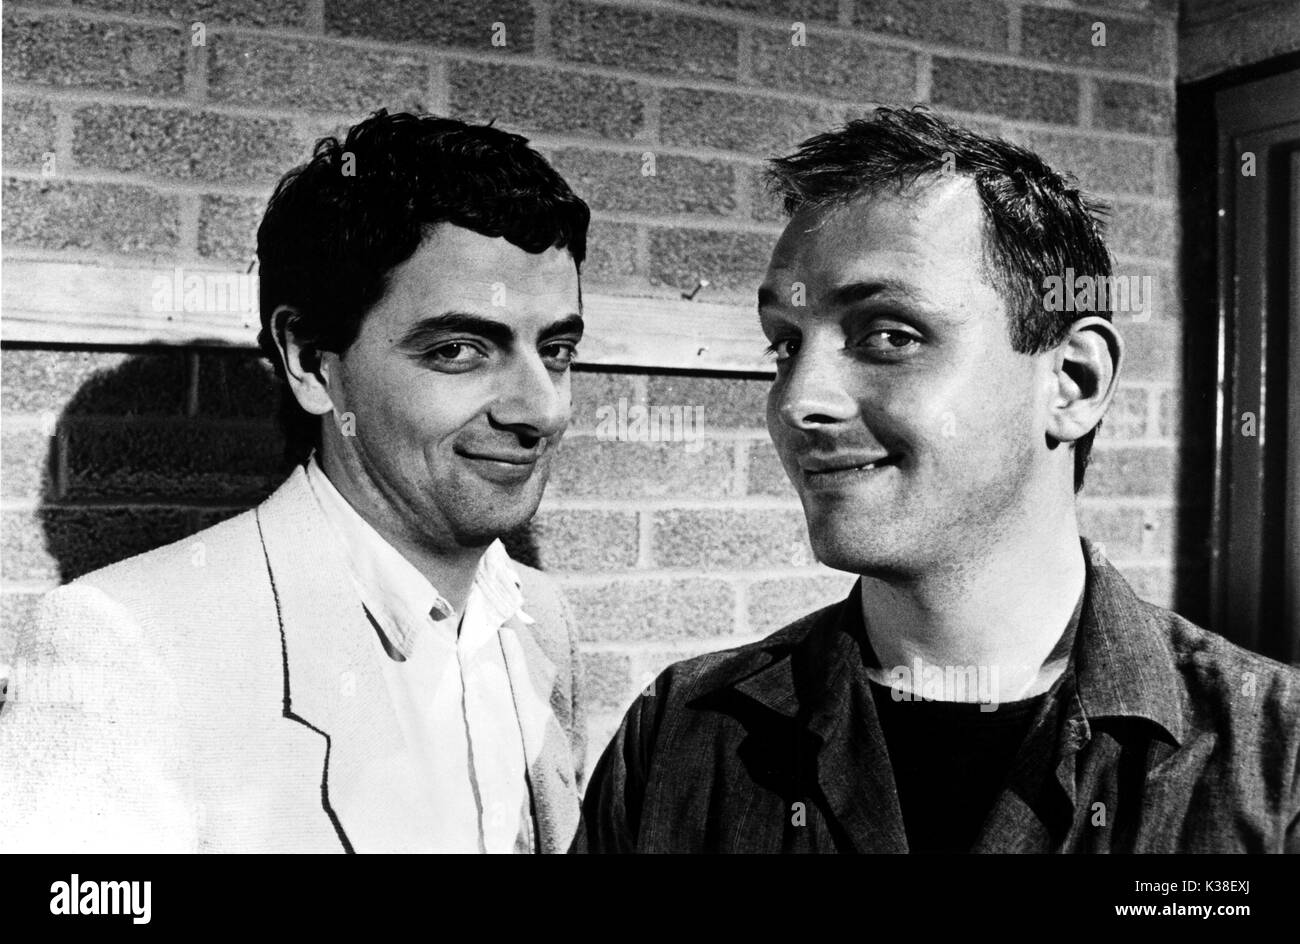 OH WHAT THE HELL A VIDEO ARTS PRODUCTION ROWAN ATKINSON AND RIK MAYALL   OH WHAT THE HELL A VIDEO ARTS PRODUCTION ROWAN ATKINSON AND RIK MAYALL Stock Photo